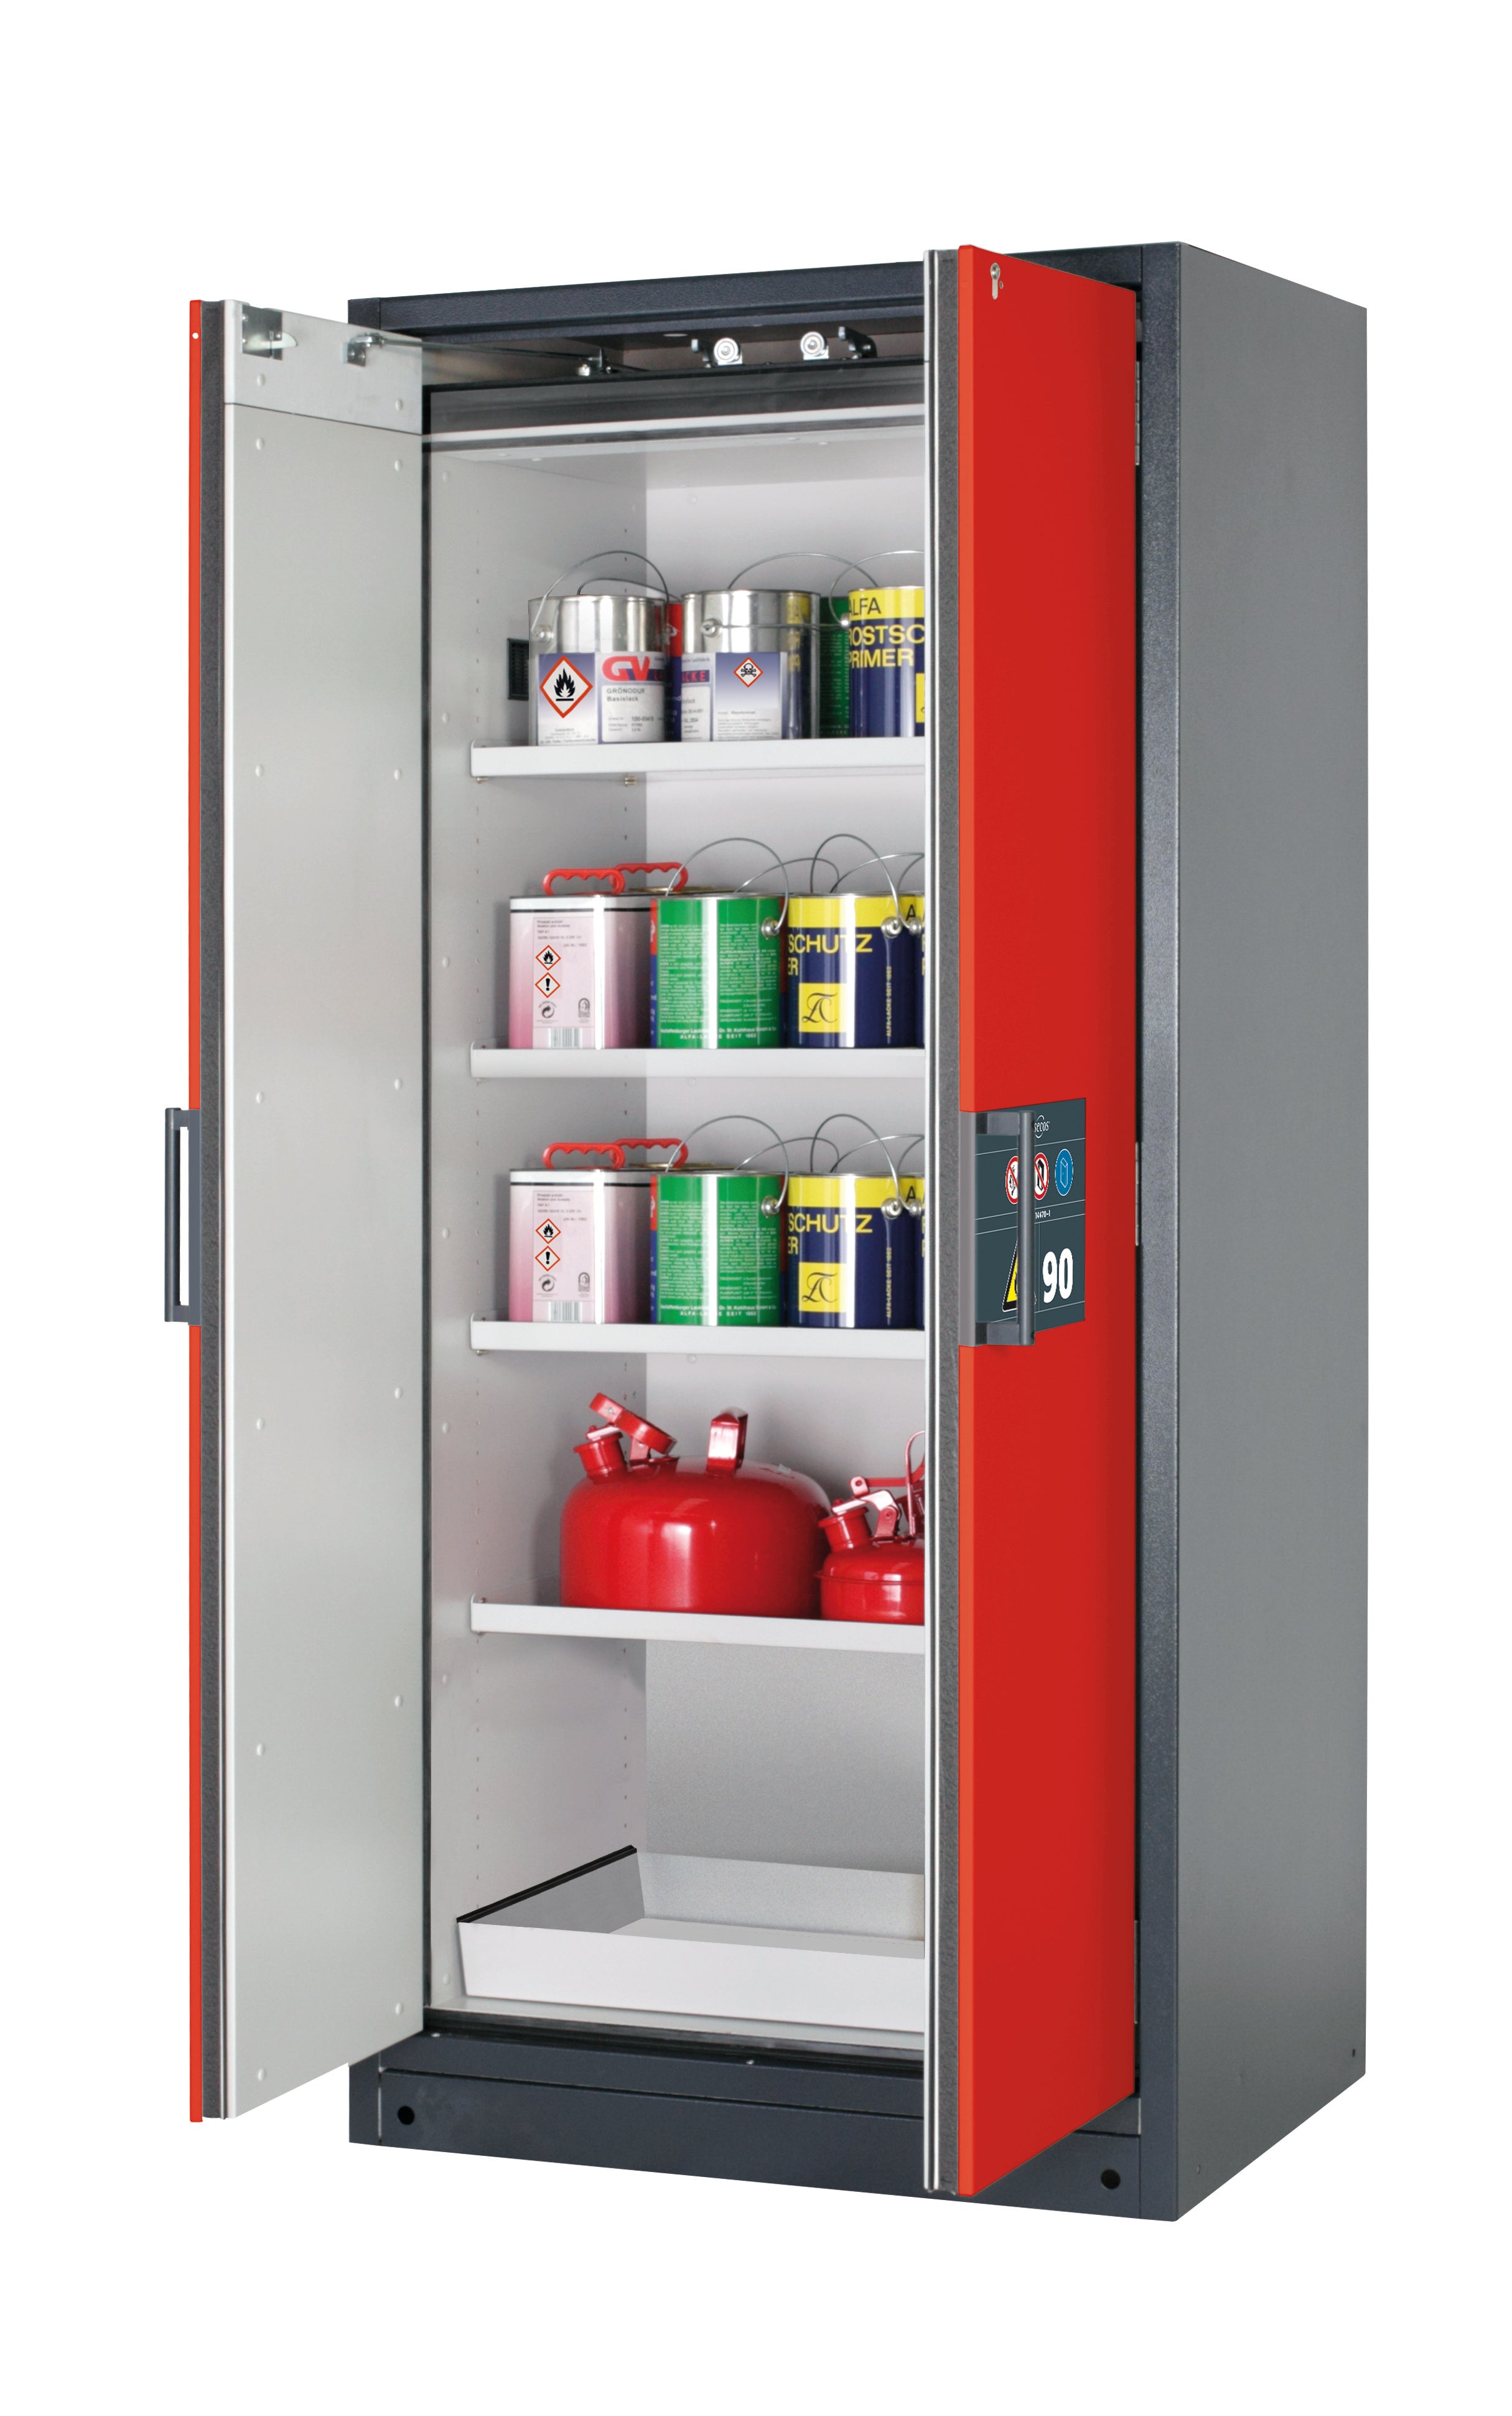 Type 90 safety storage cabinet Q-CLASSIC-90 model Q90.195.090 in traffic red RAL 3020 with 4x shelf standard (sheet steel),